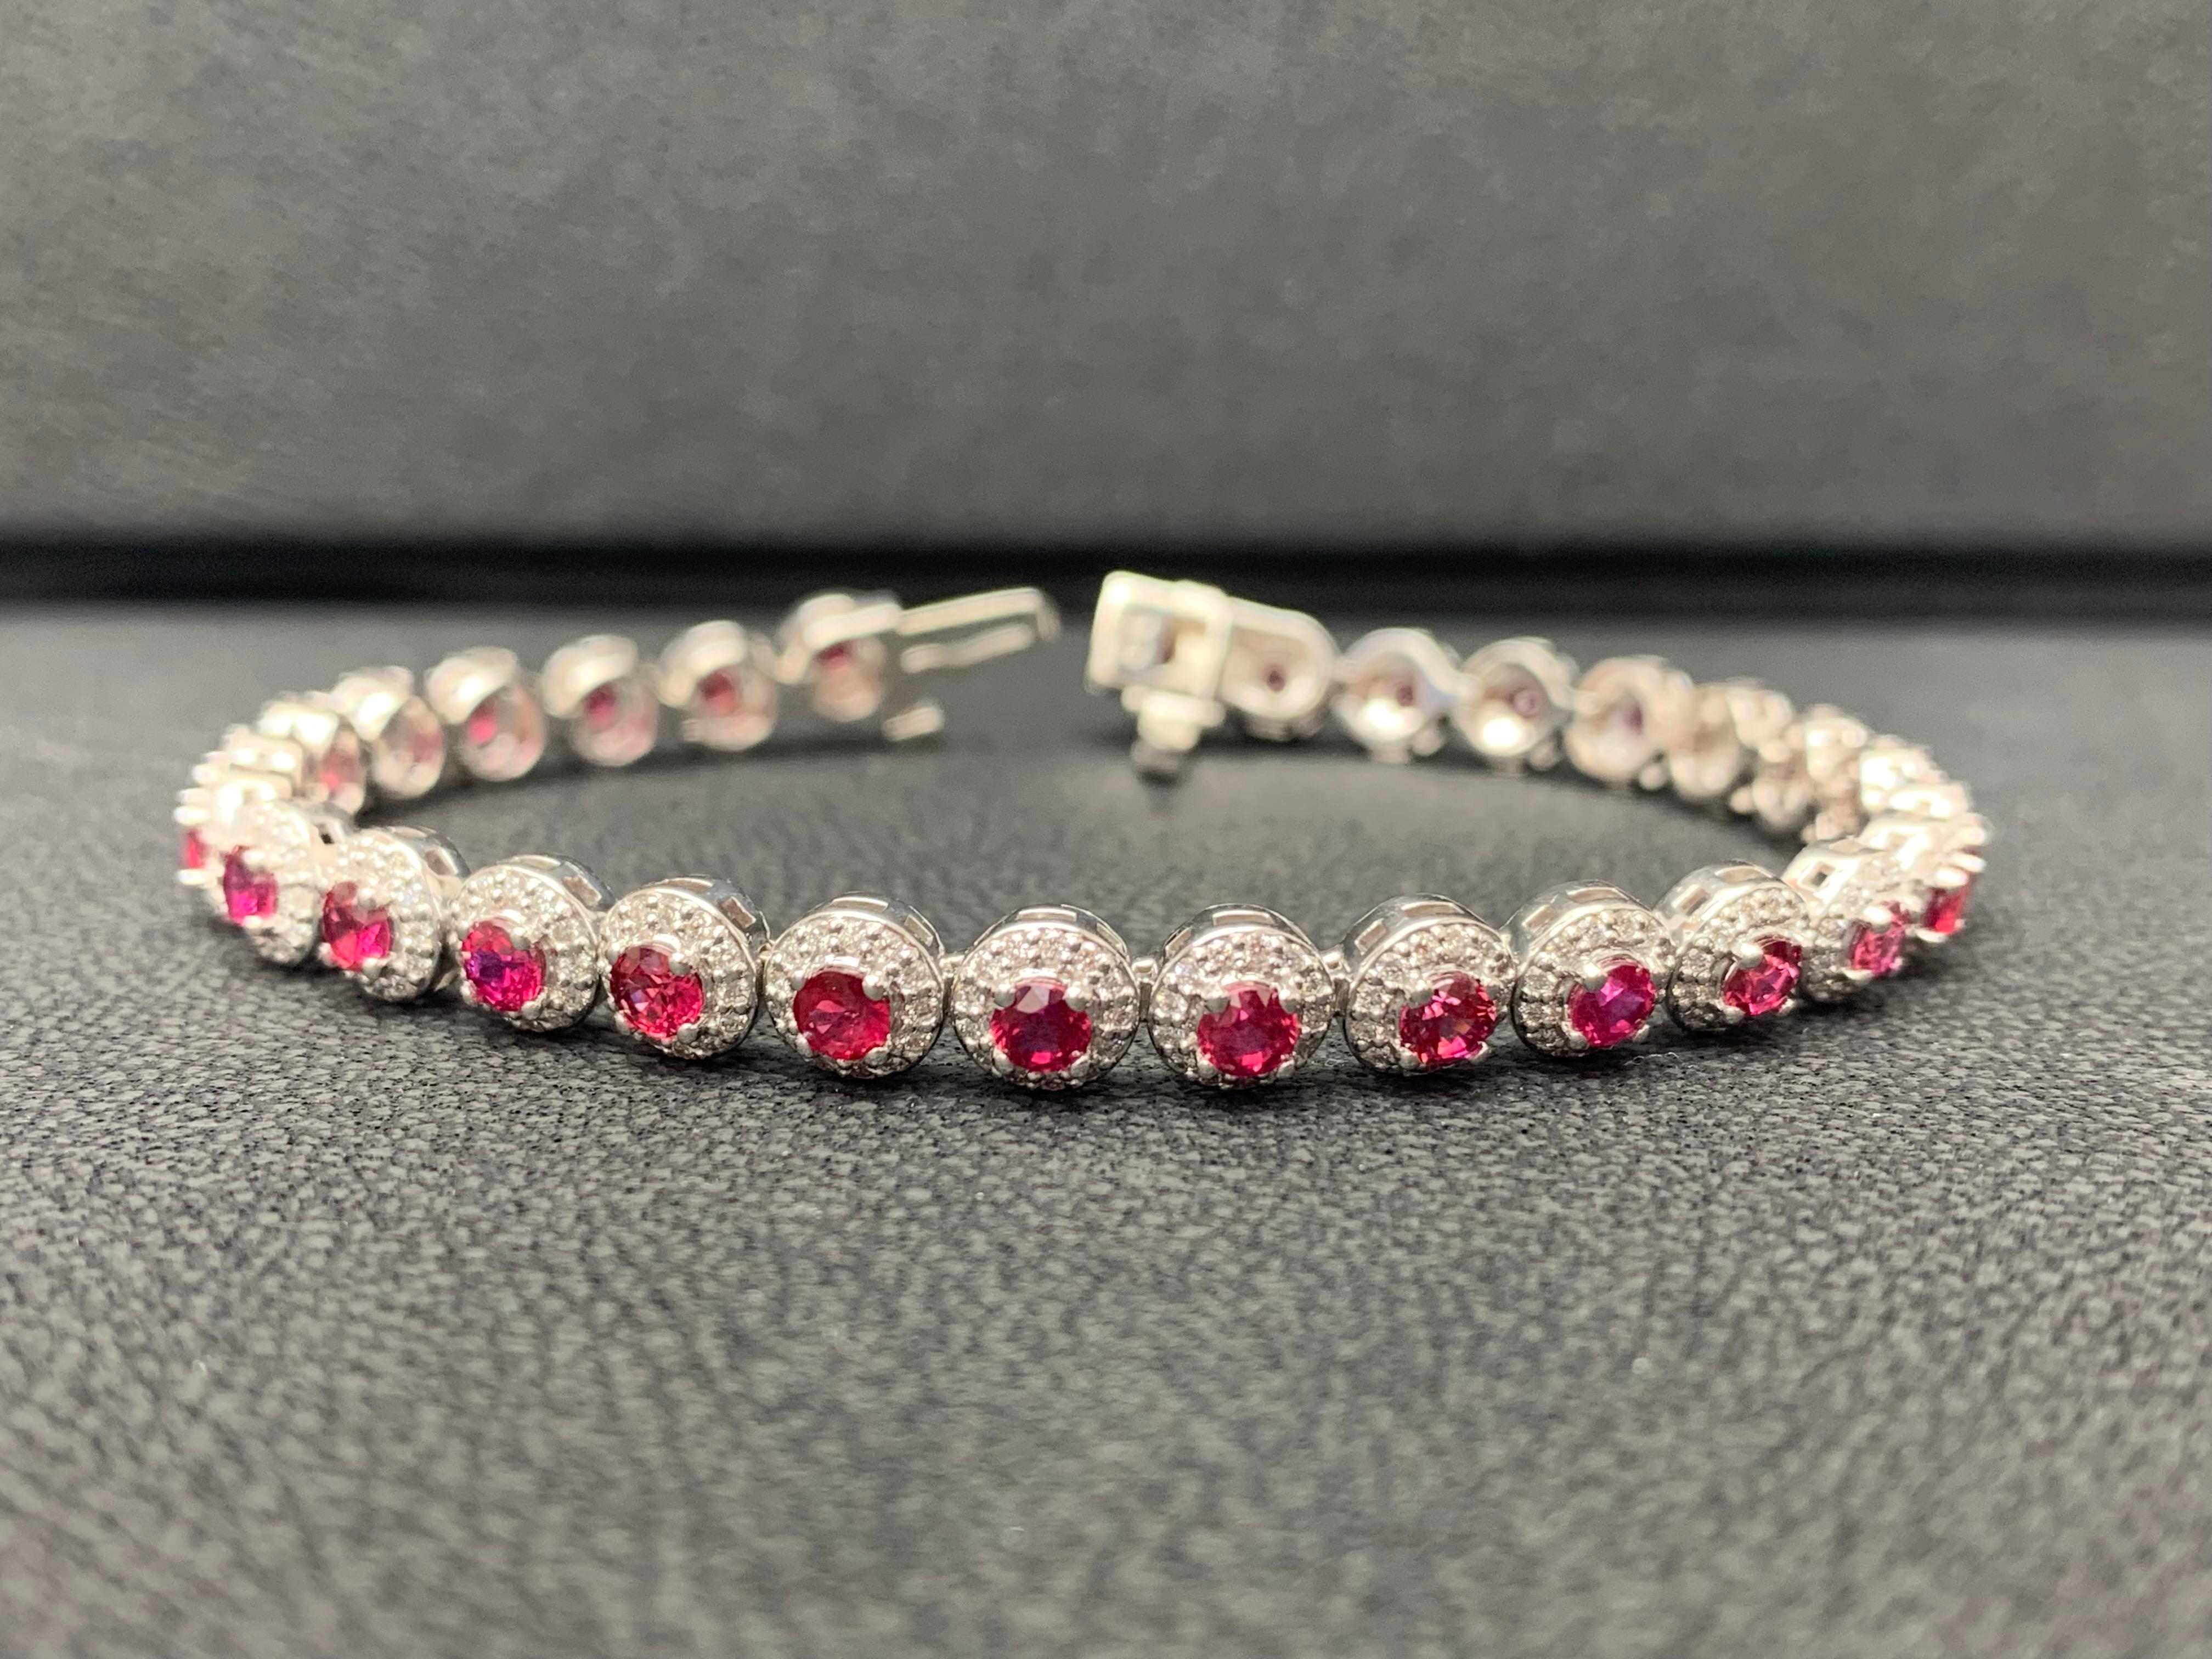 Add color to your style with this gorgeous Ruby bracelet. Features 29 Round cut Red Rubies surrounded by a single row of sparkling round diamonds in a halo setting. Rubies and diamonds weigh 4.62 carats and 1.57 carats total respectively. Made in 14